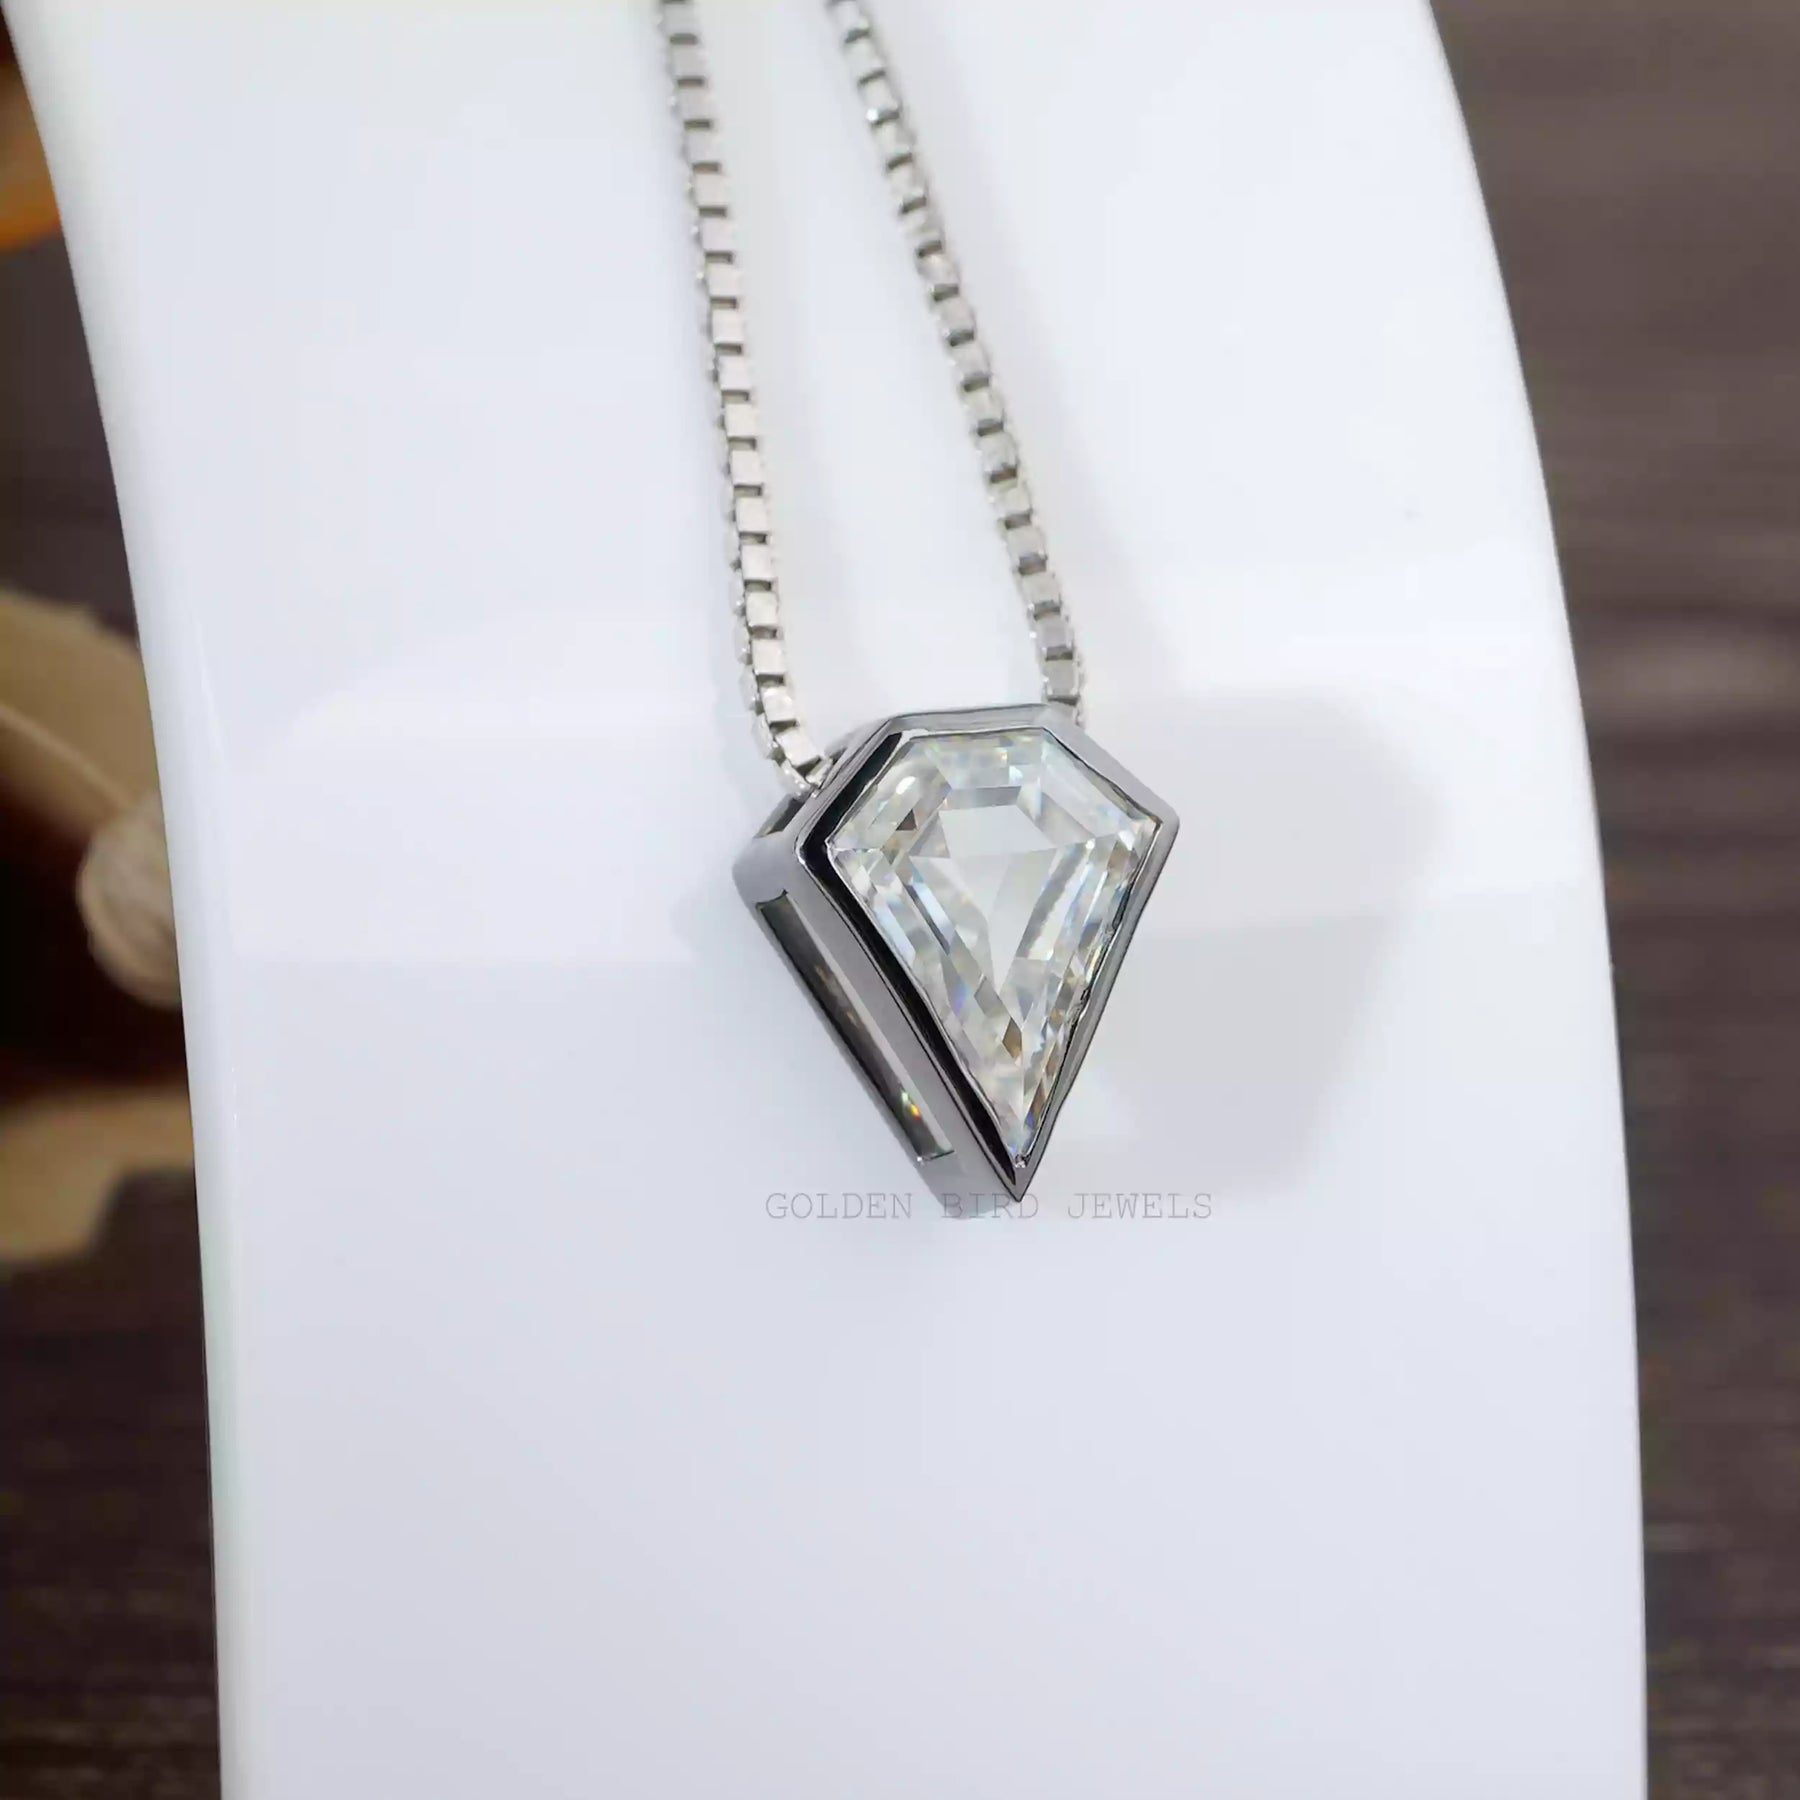 [This moissanite pentagon pendant crafted with vvs clarity and white gold]-[Golden Bird Jewels]